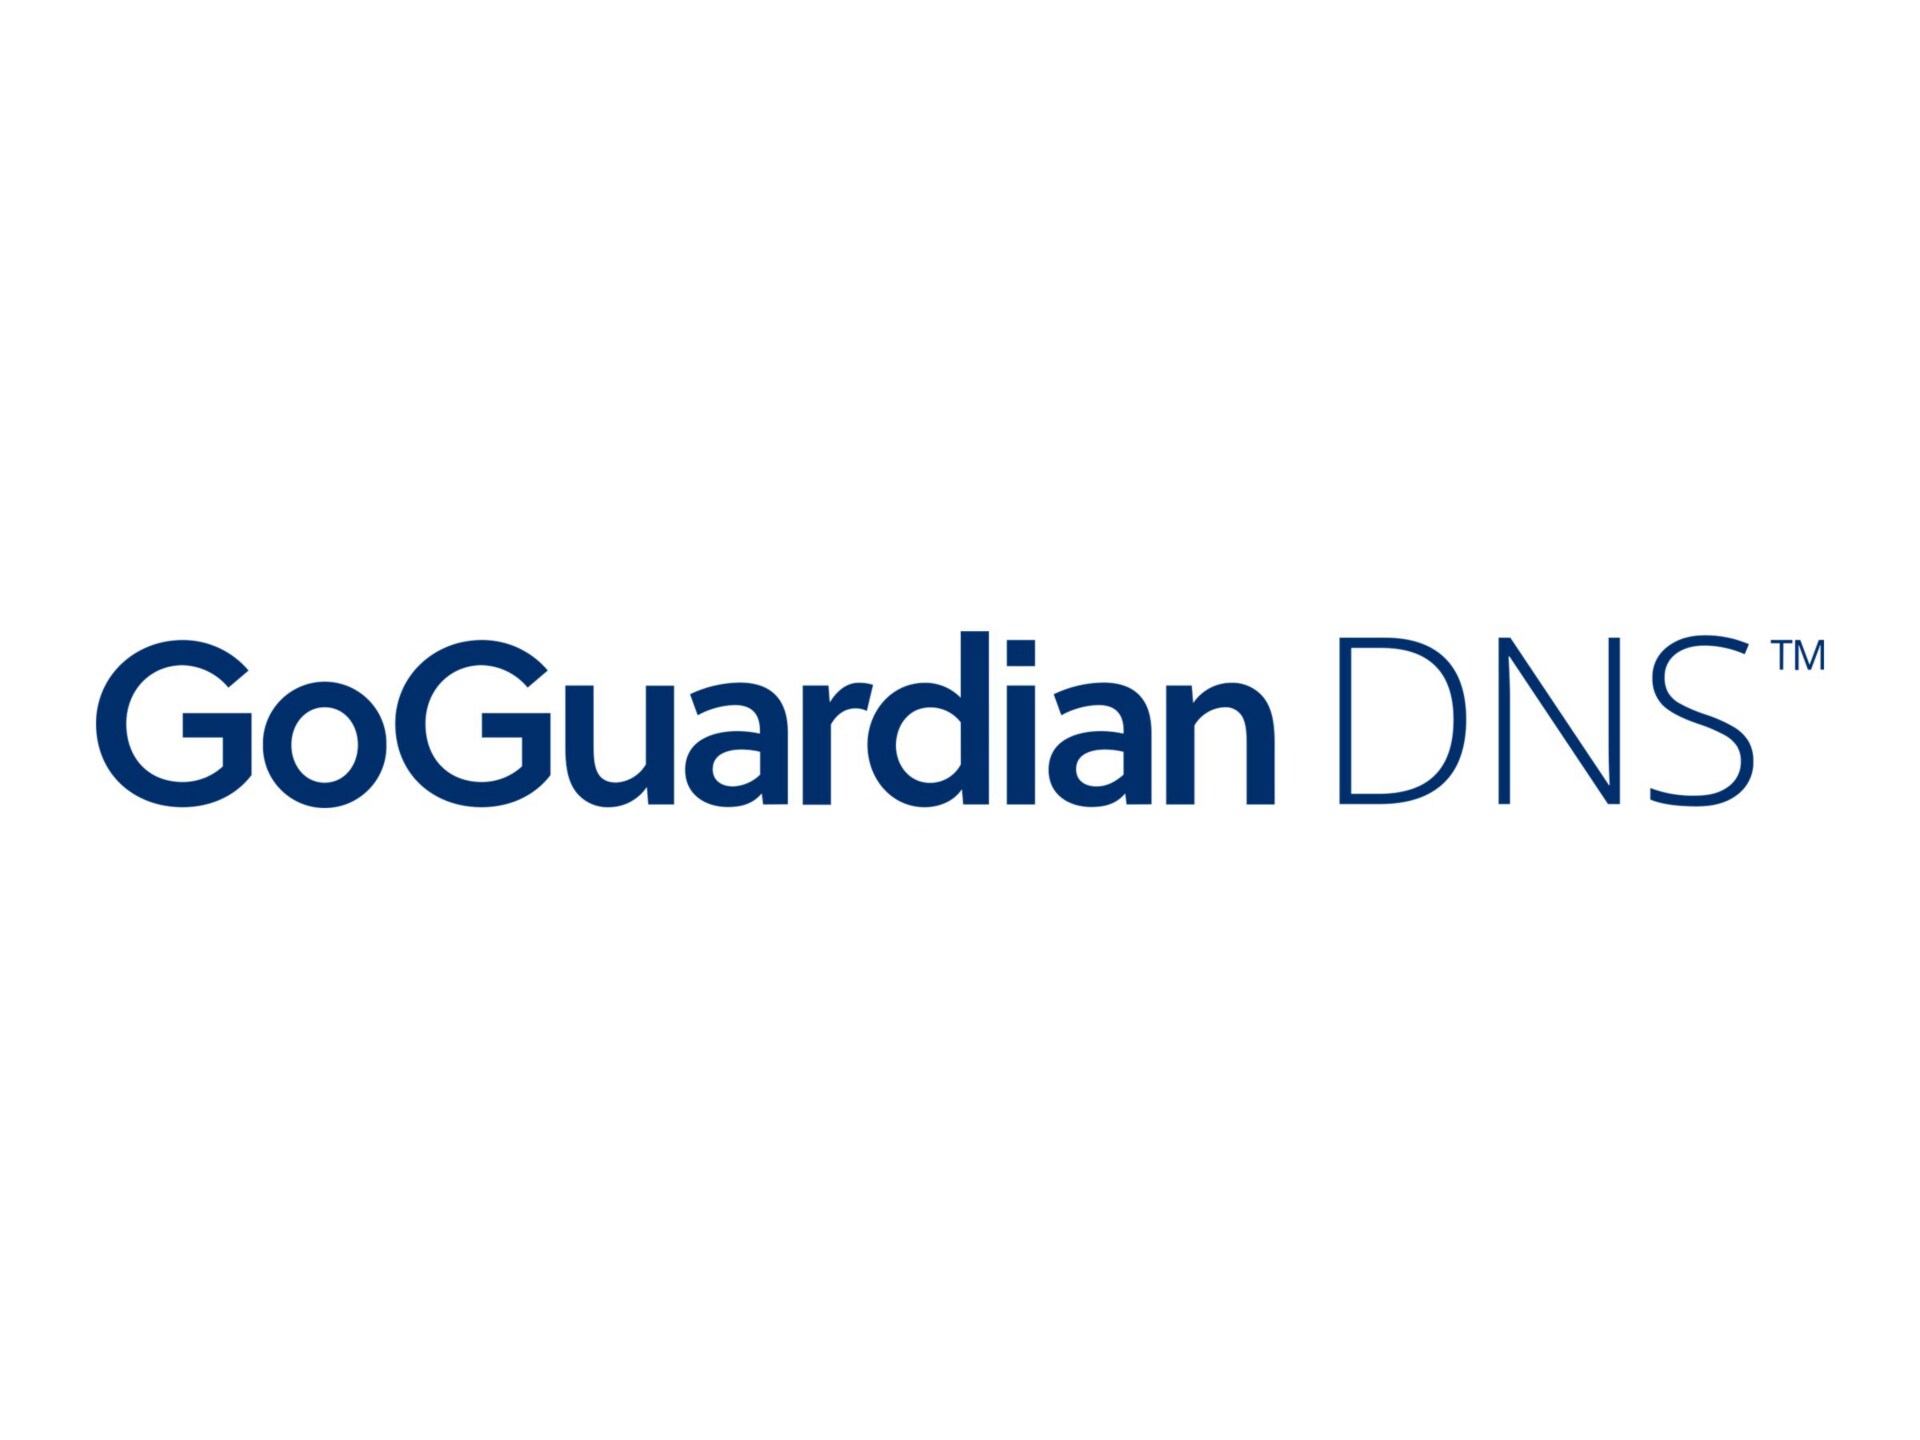 GoGuardian DNS - subscription license (5 years) - 1 license